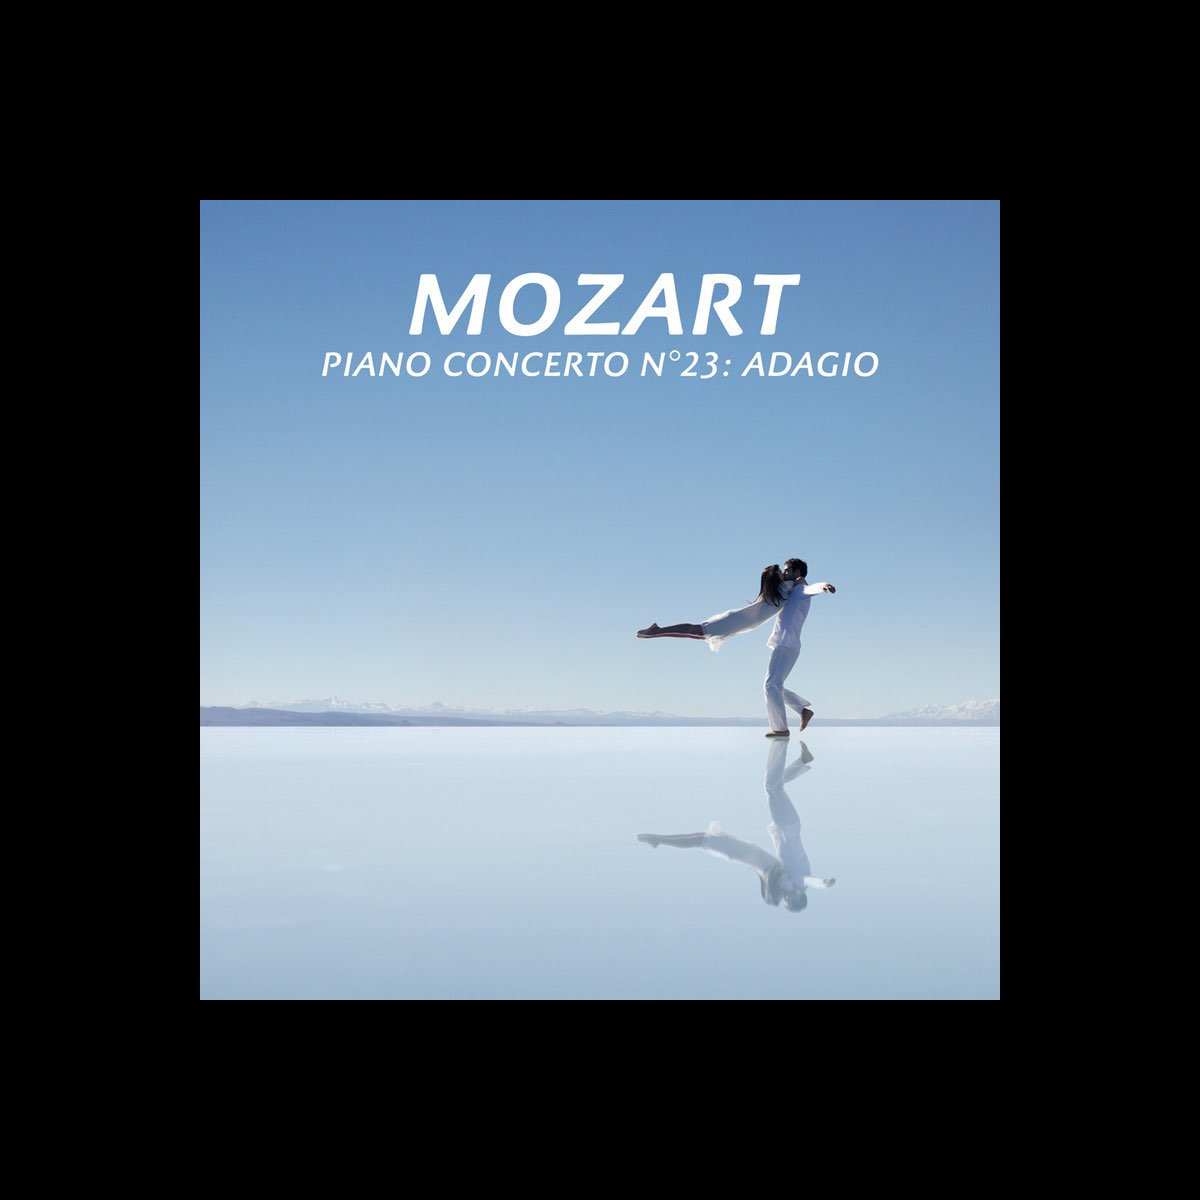 Mozart: Piano Concerto No. 23 in A, K. 488: II. Adagio - Single by  François-Xavier Roth, Vanessa Wagner & Les Siècles on Apple Music